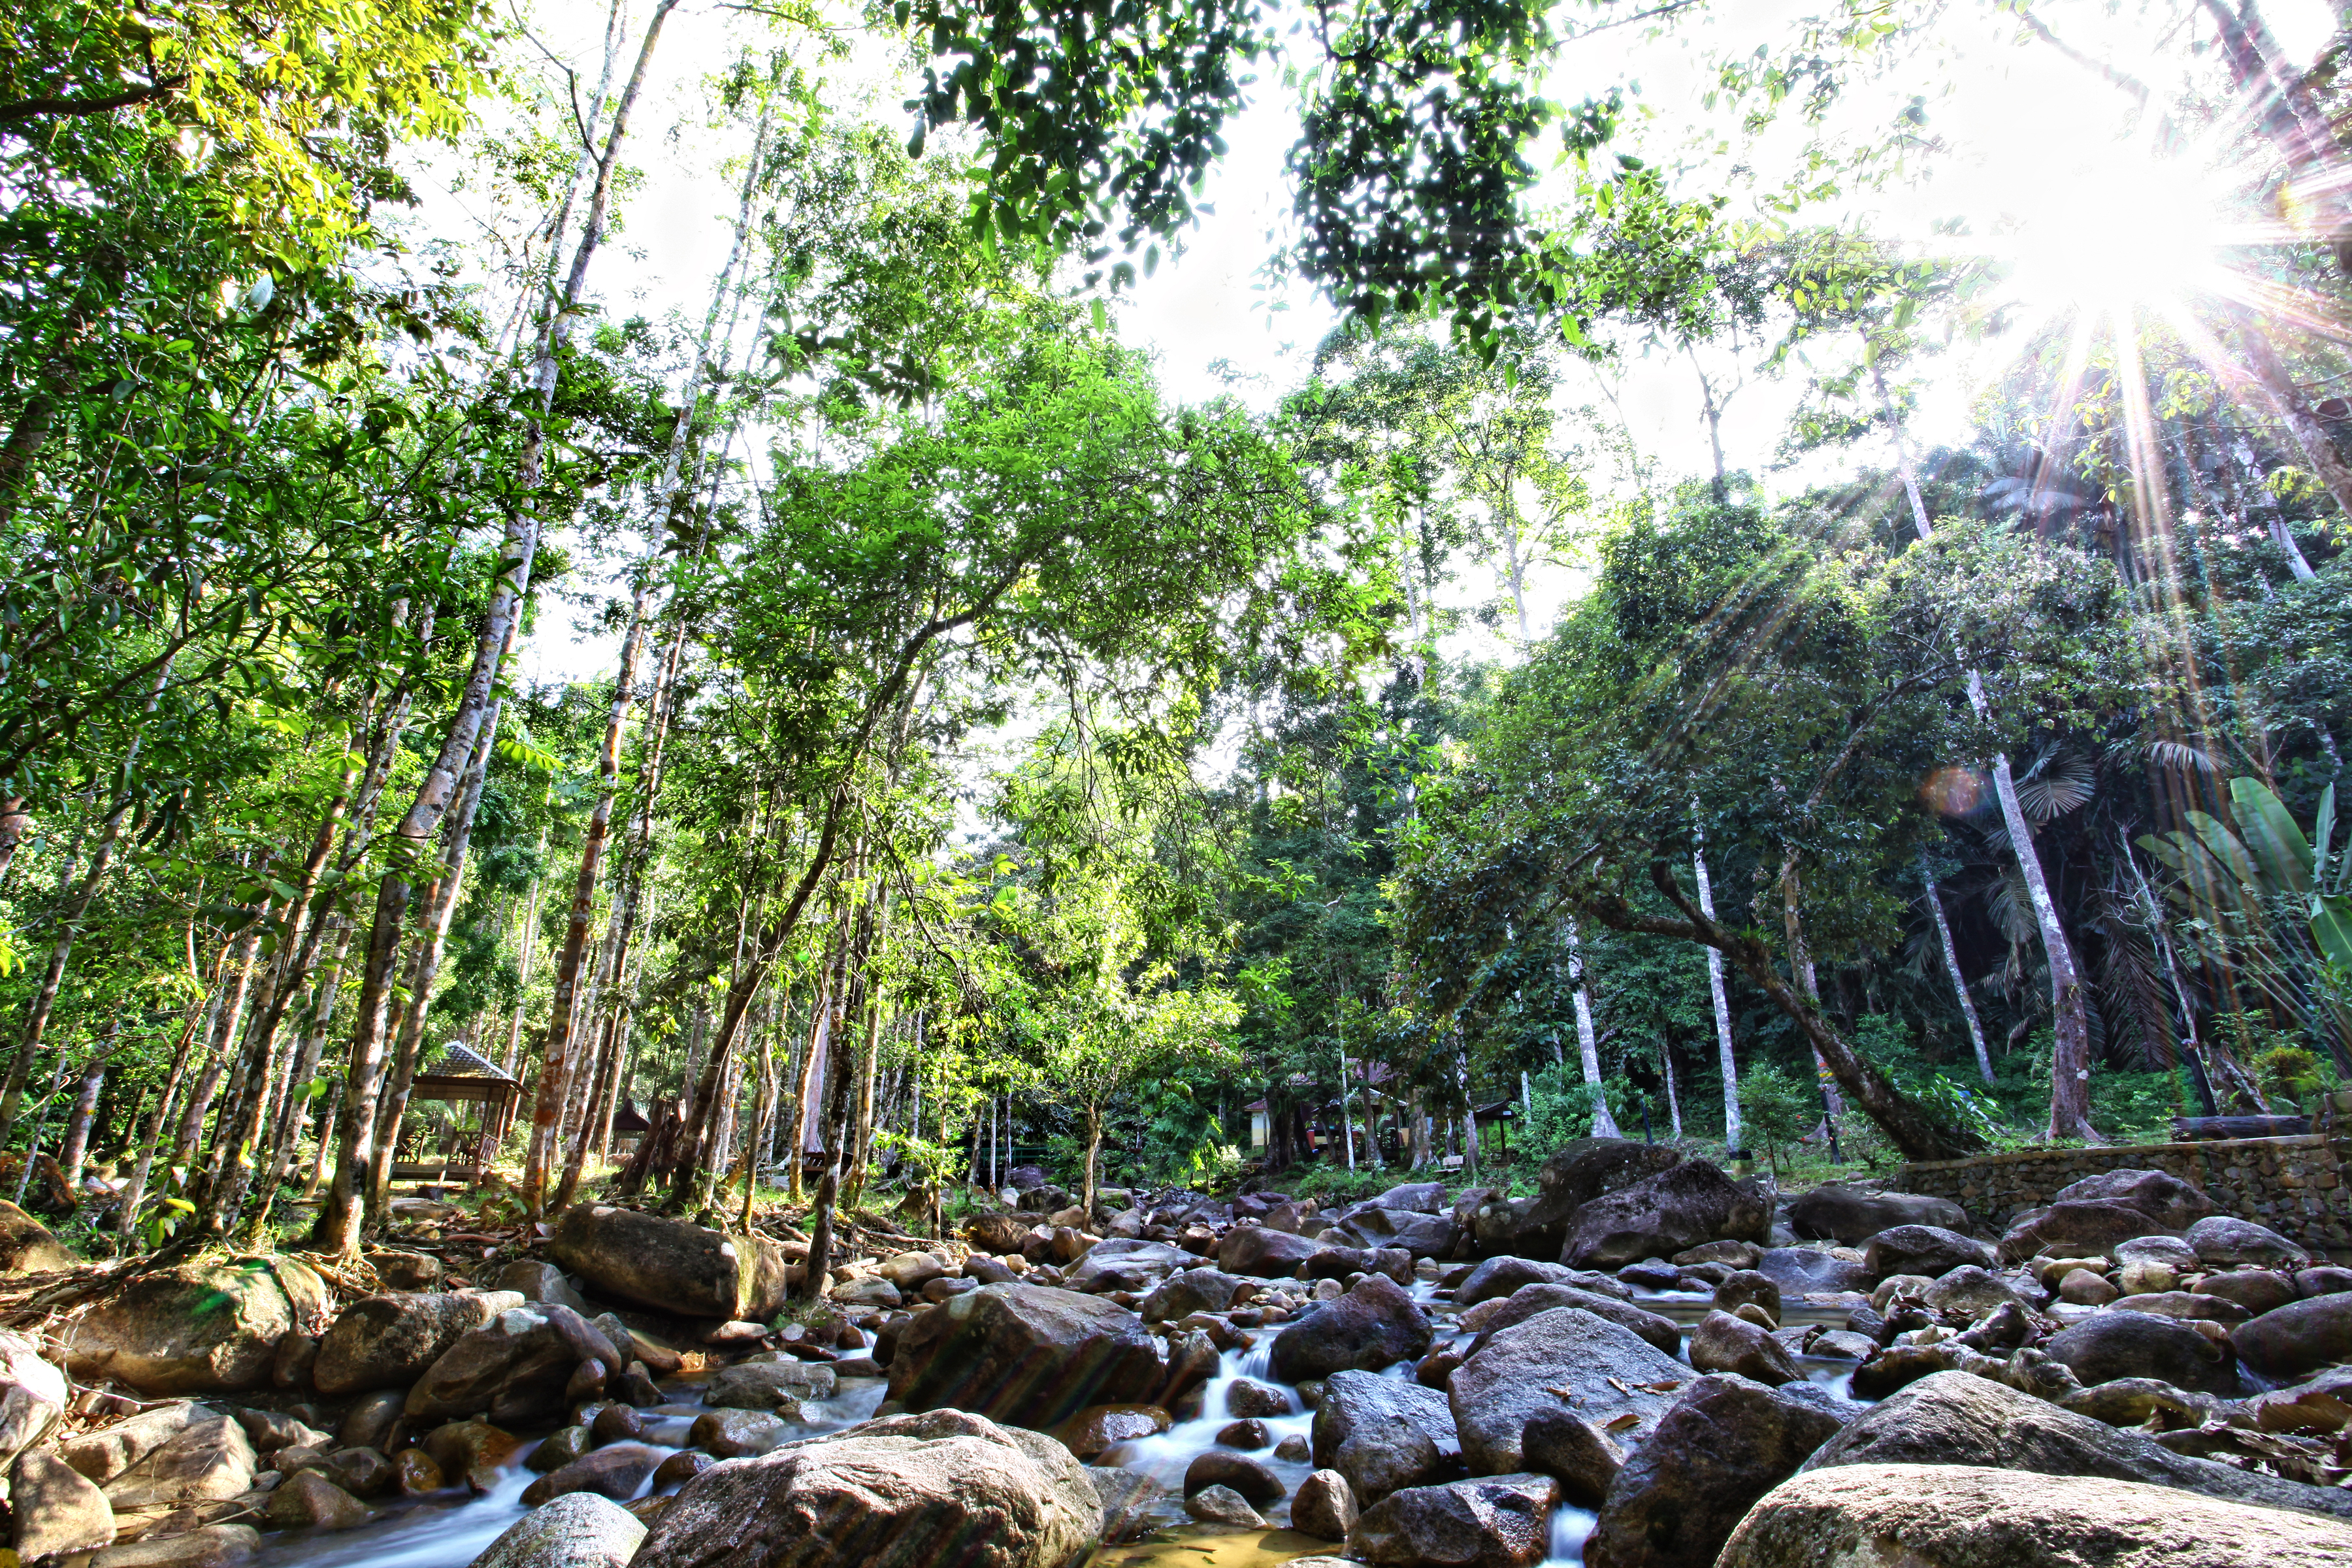 Recreational Forest Sungai Bantang. (Photo credited to forestry.gov.my)